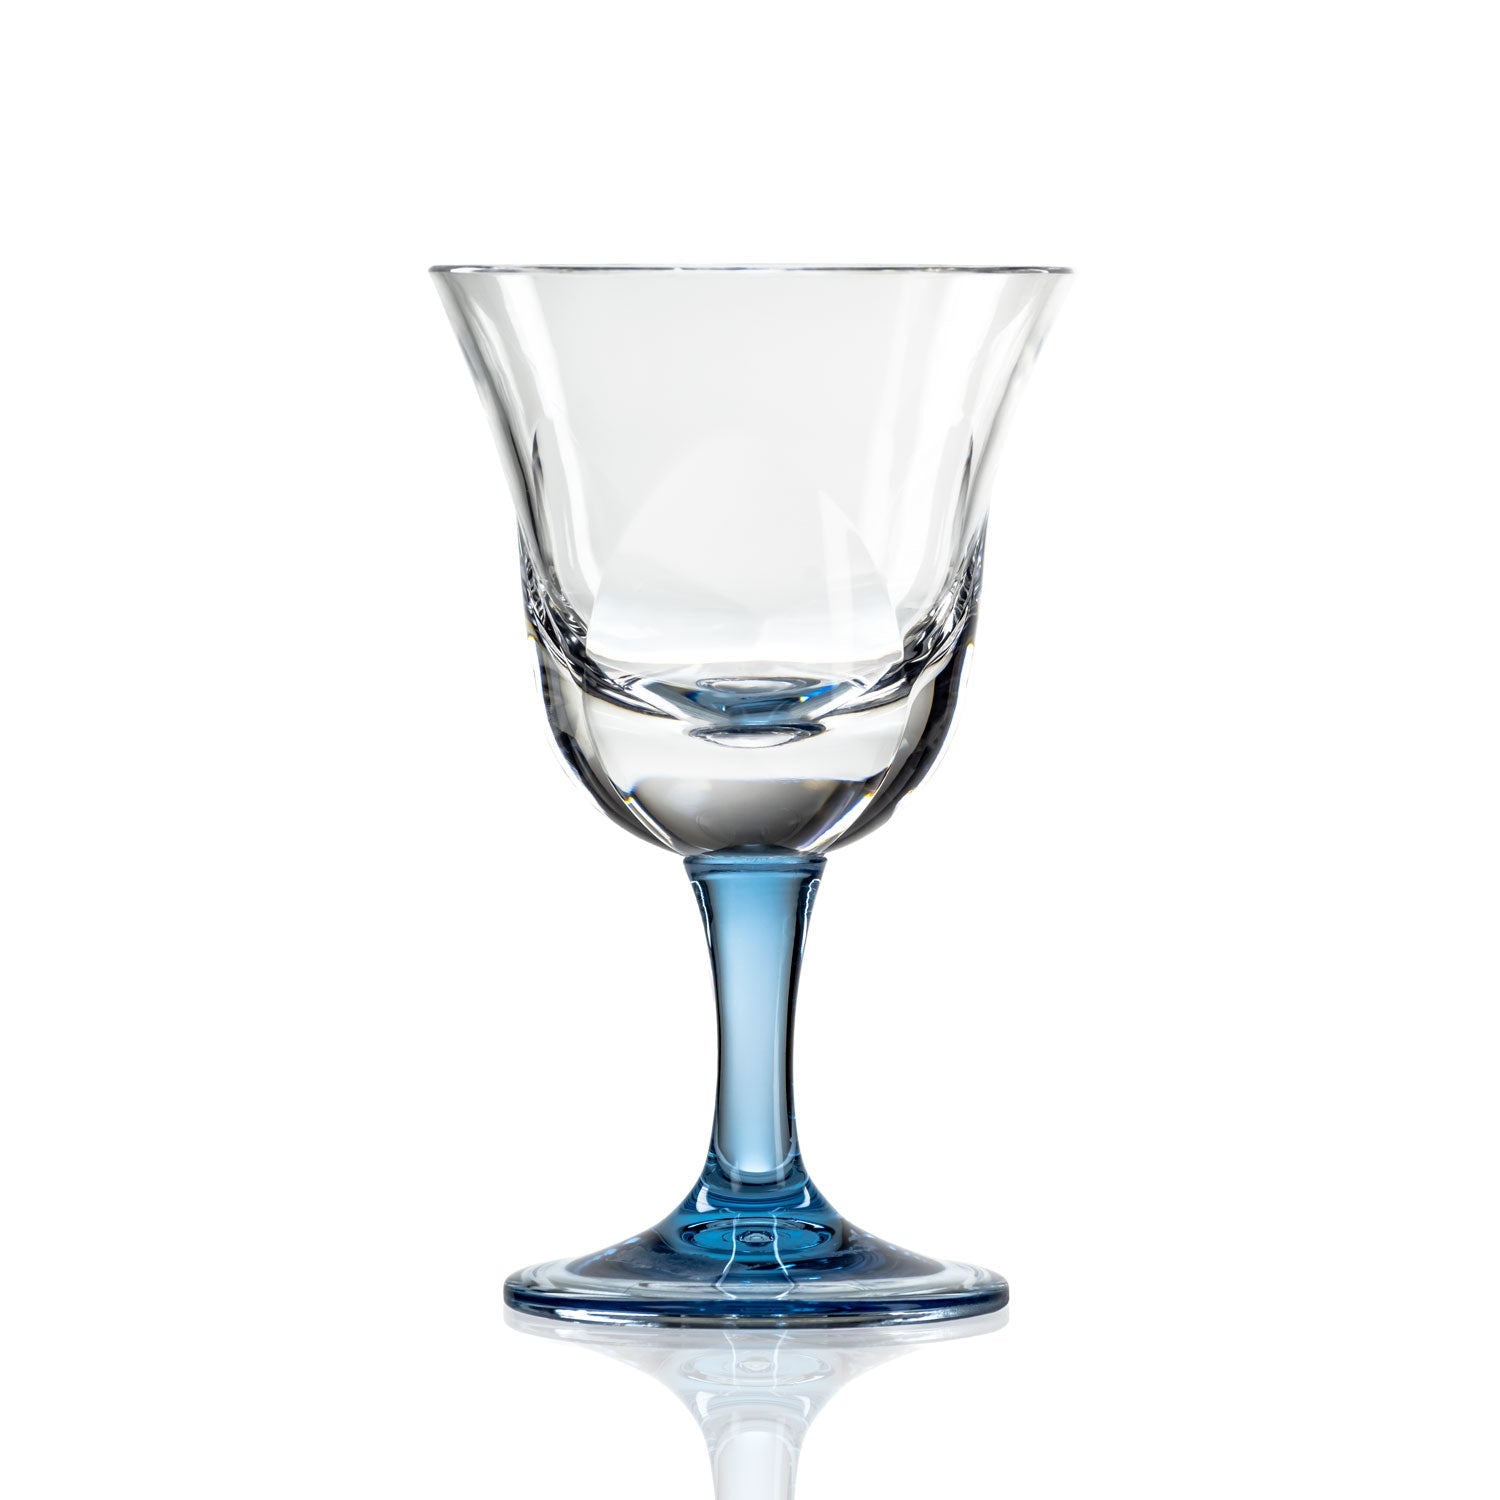 10-ounce blue acrylic wine glass in the Fiori collection by Merritt Designs. Front view on white background